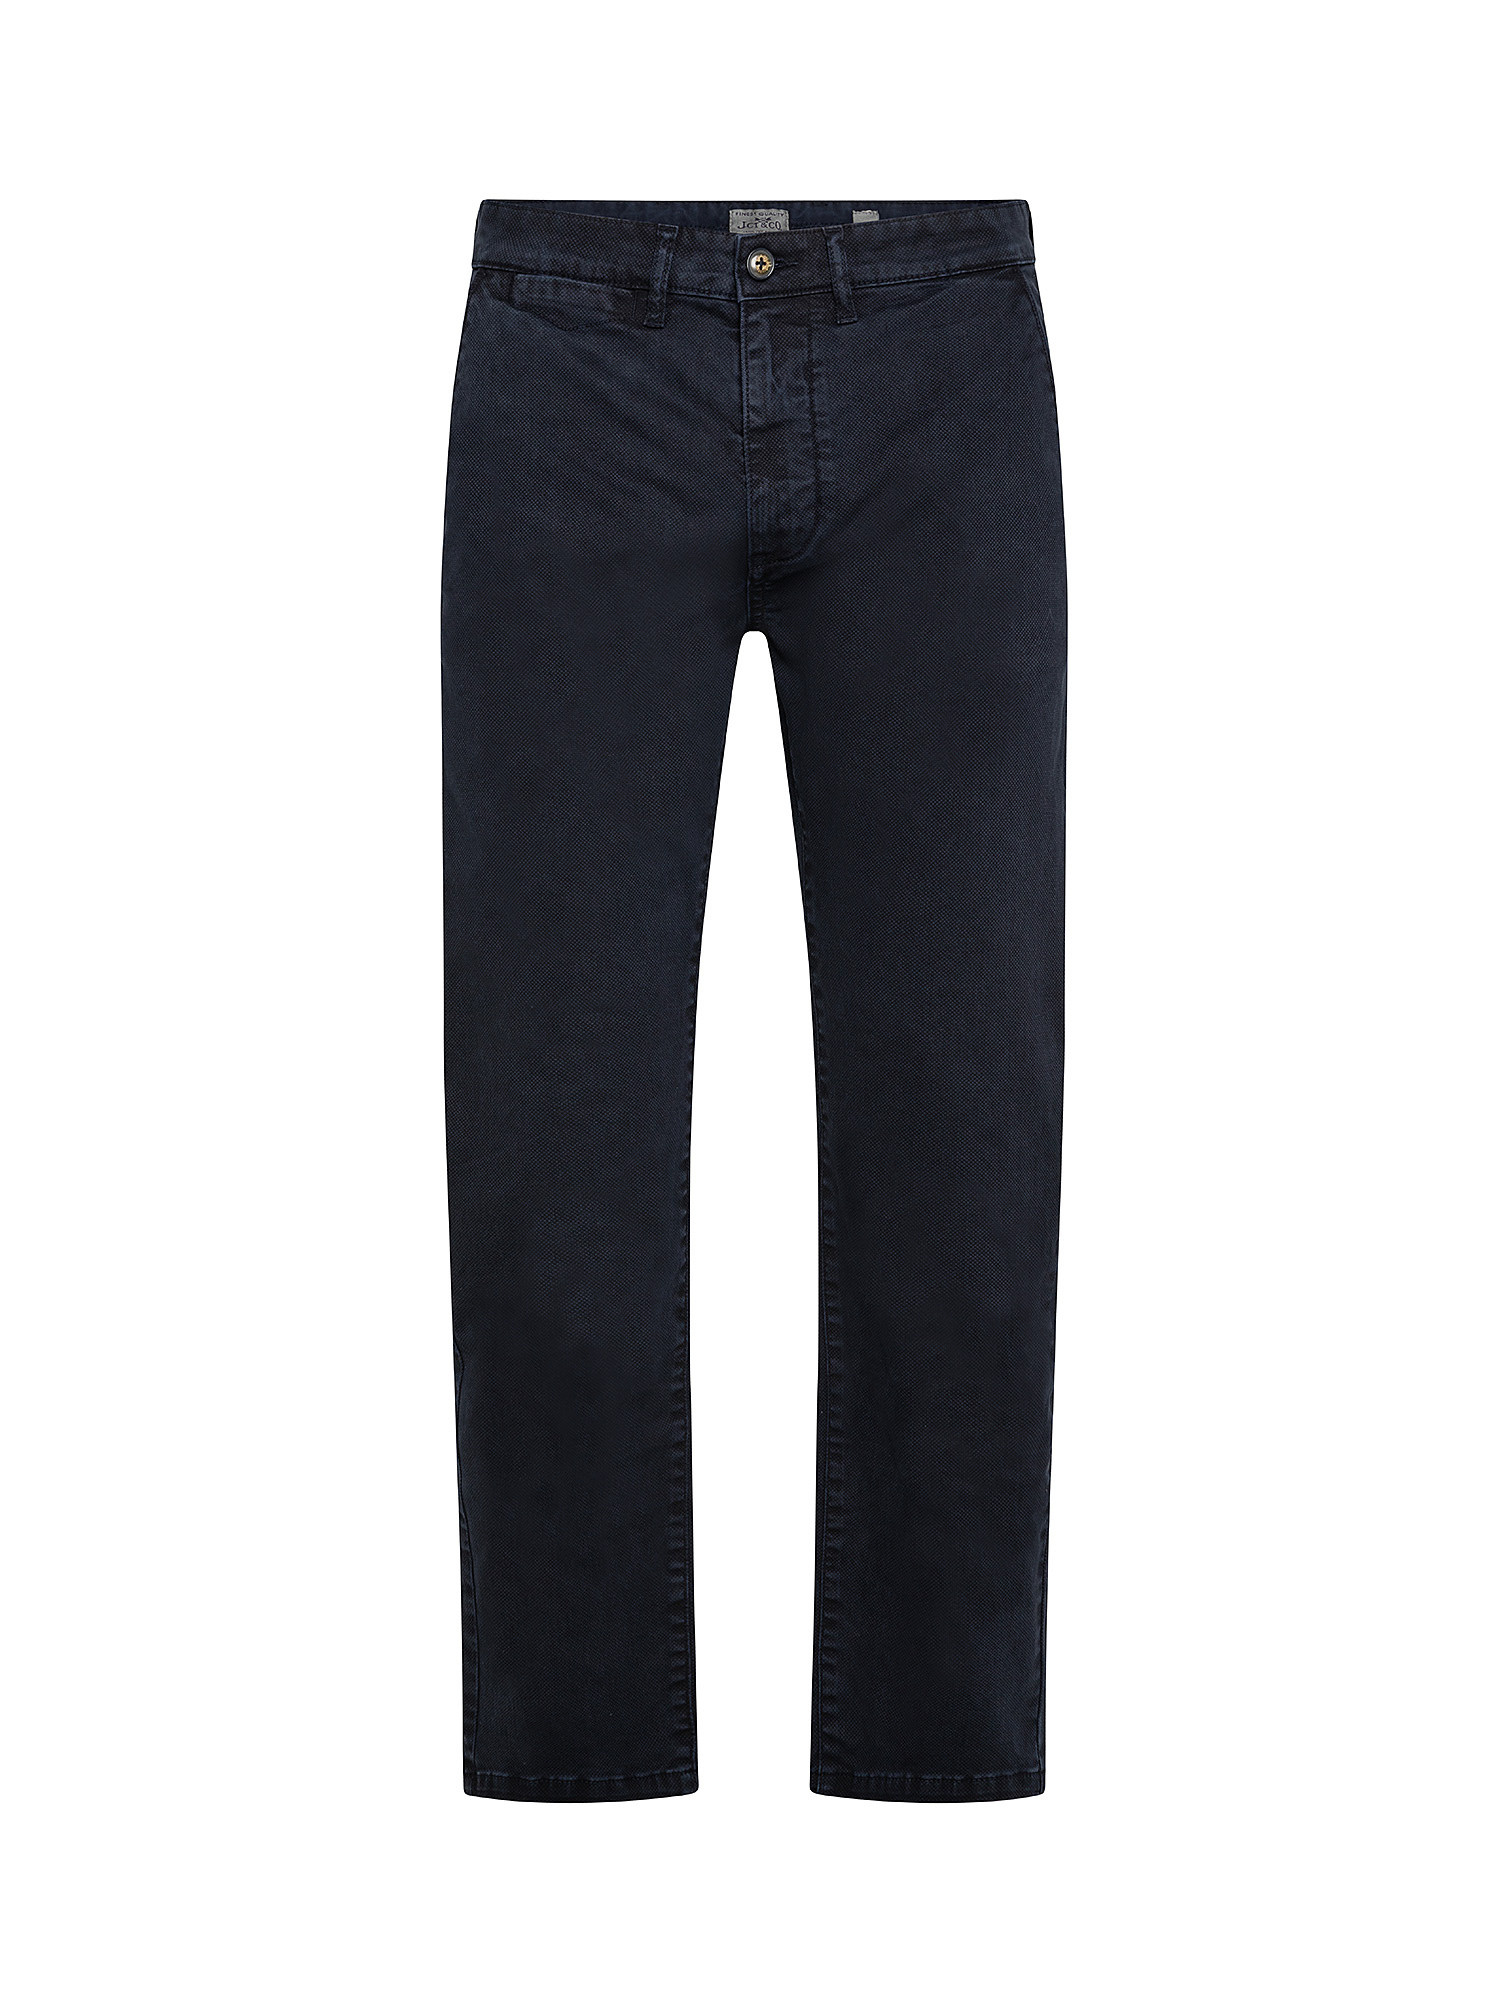 Stretch cotton chinos trousers, Dark Blue, large image number 0